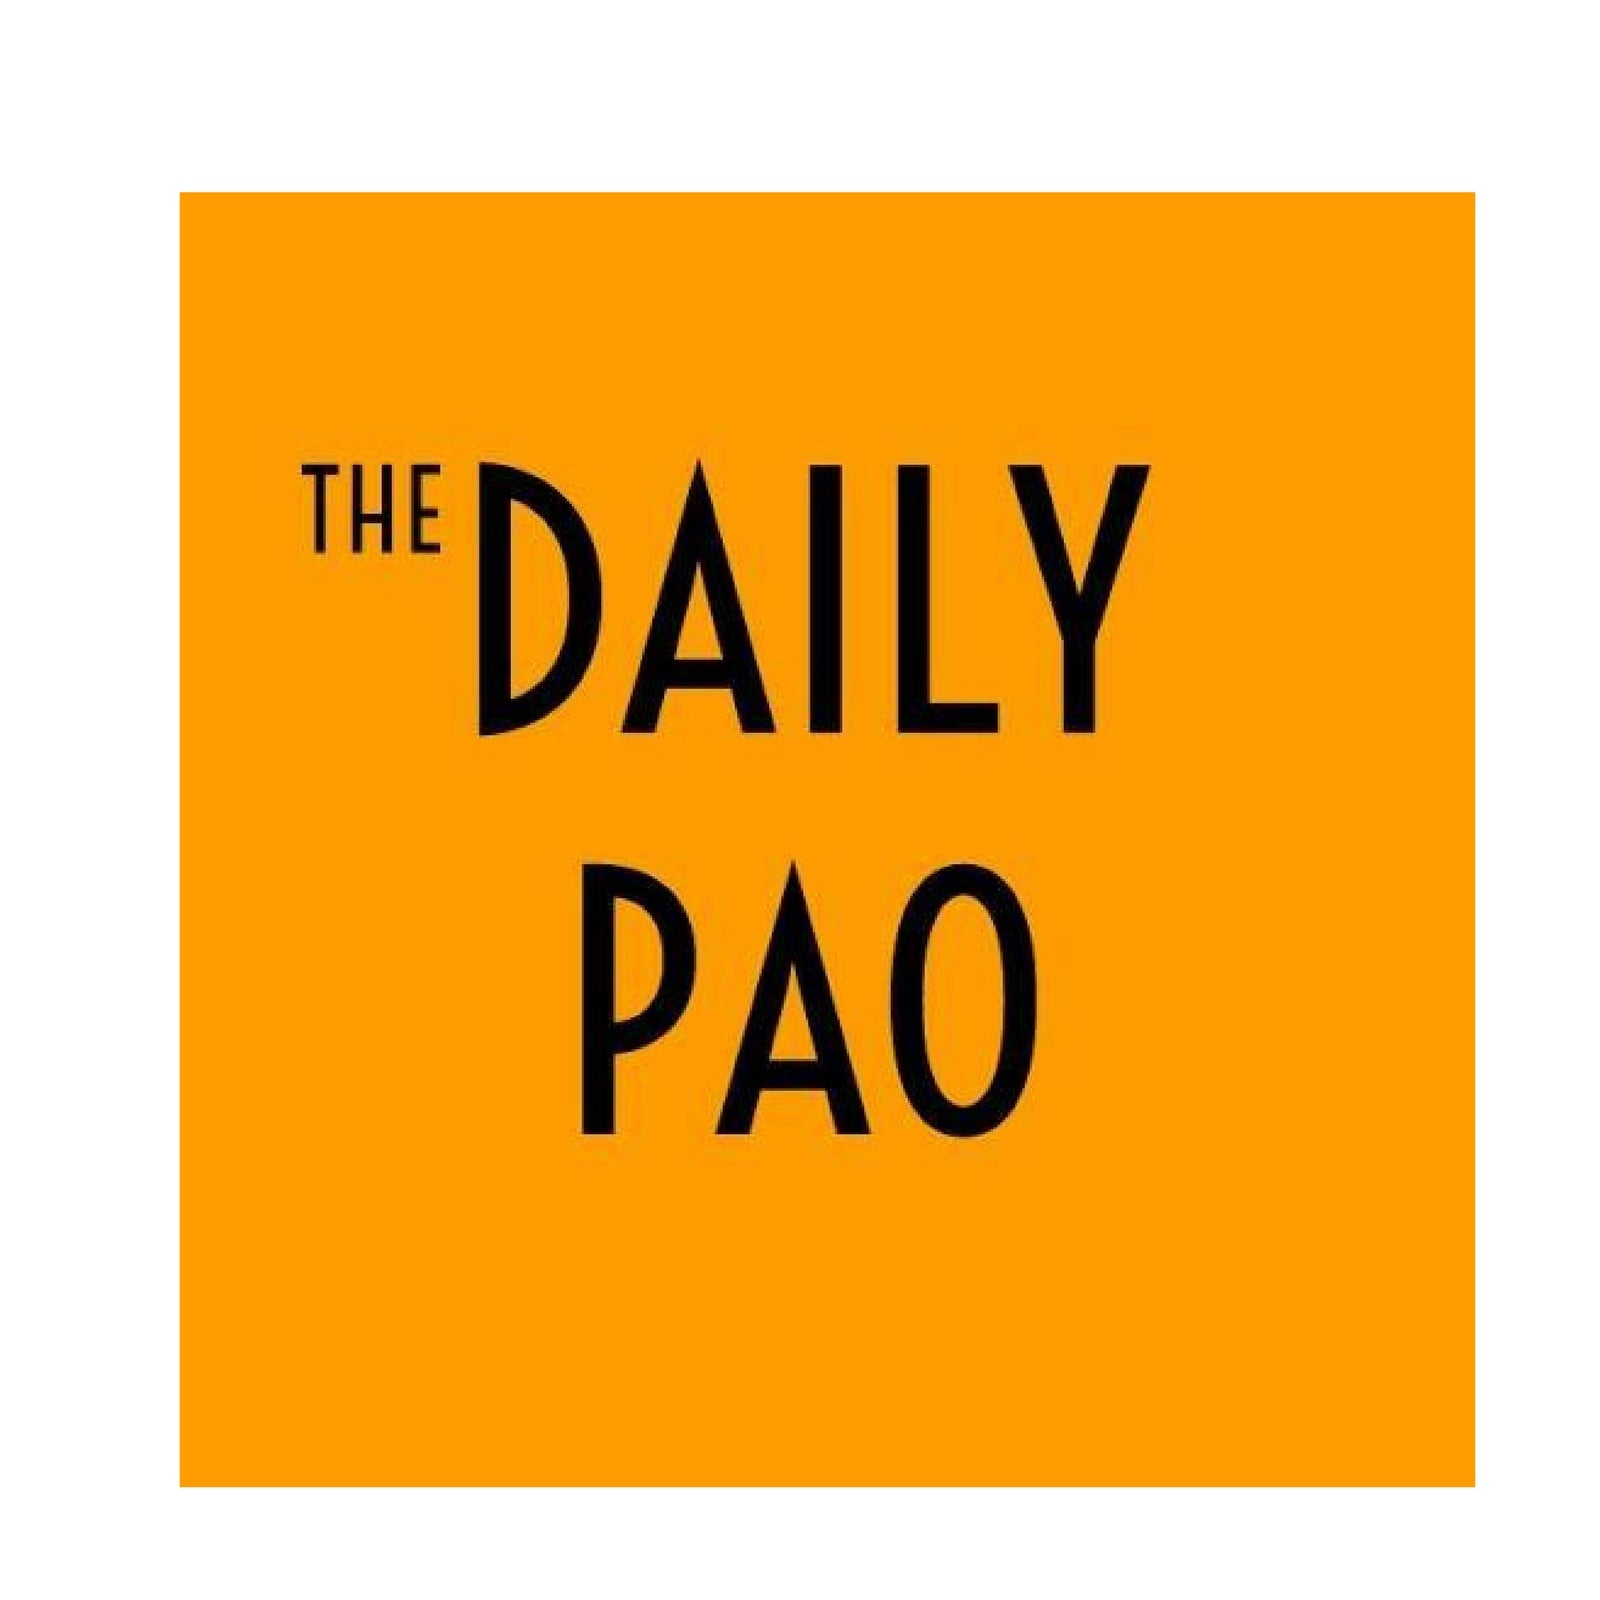 The Daily Pao